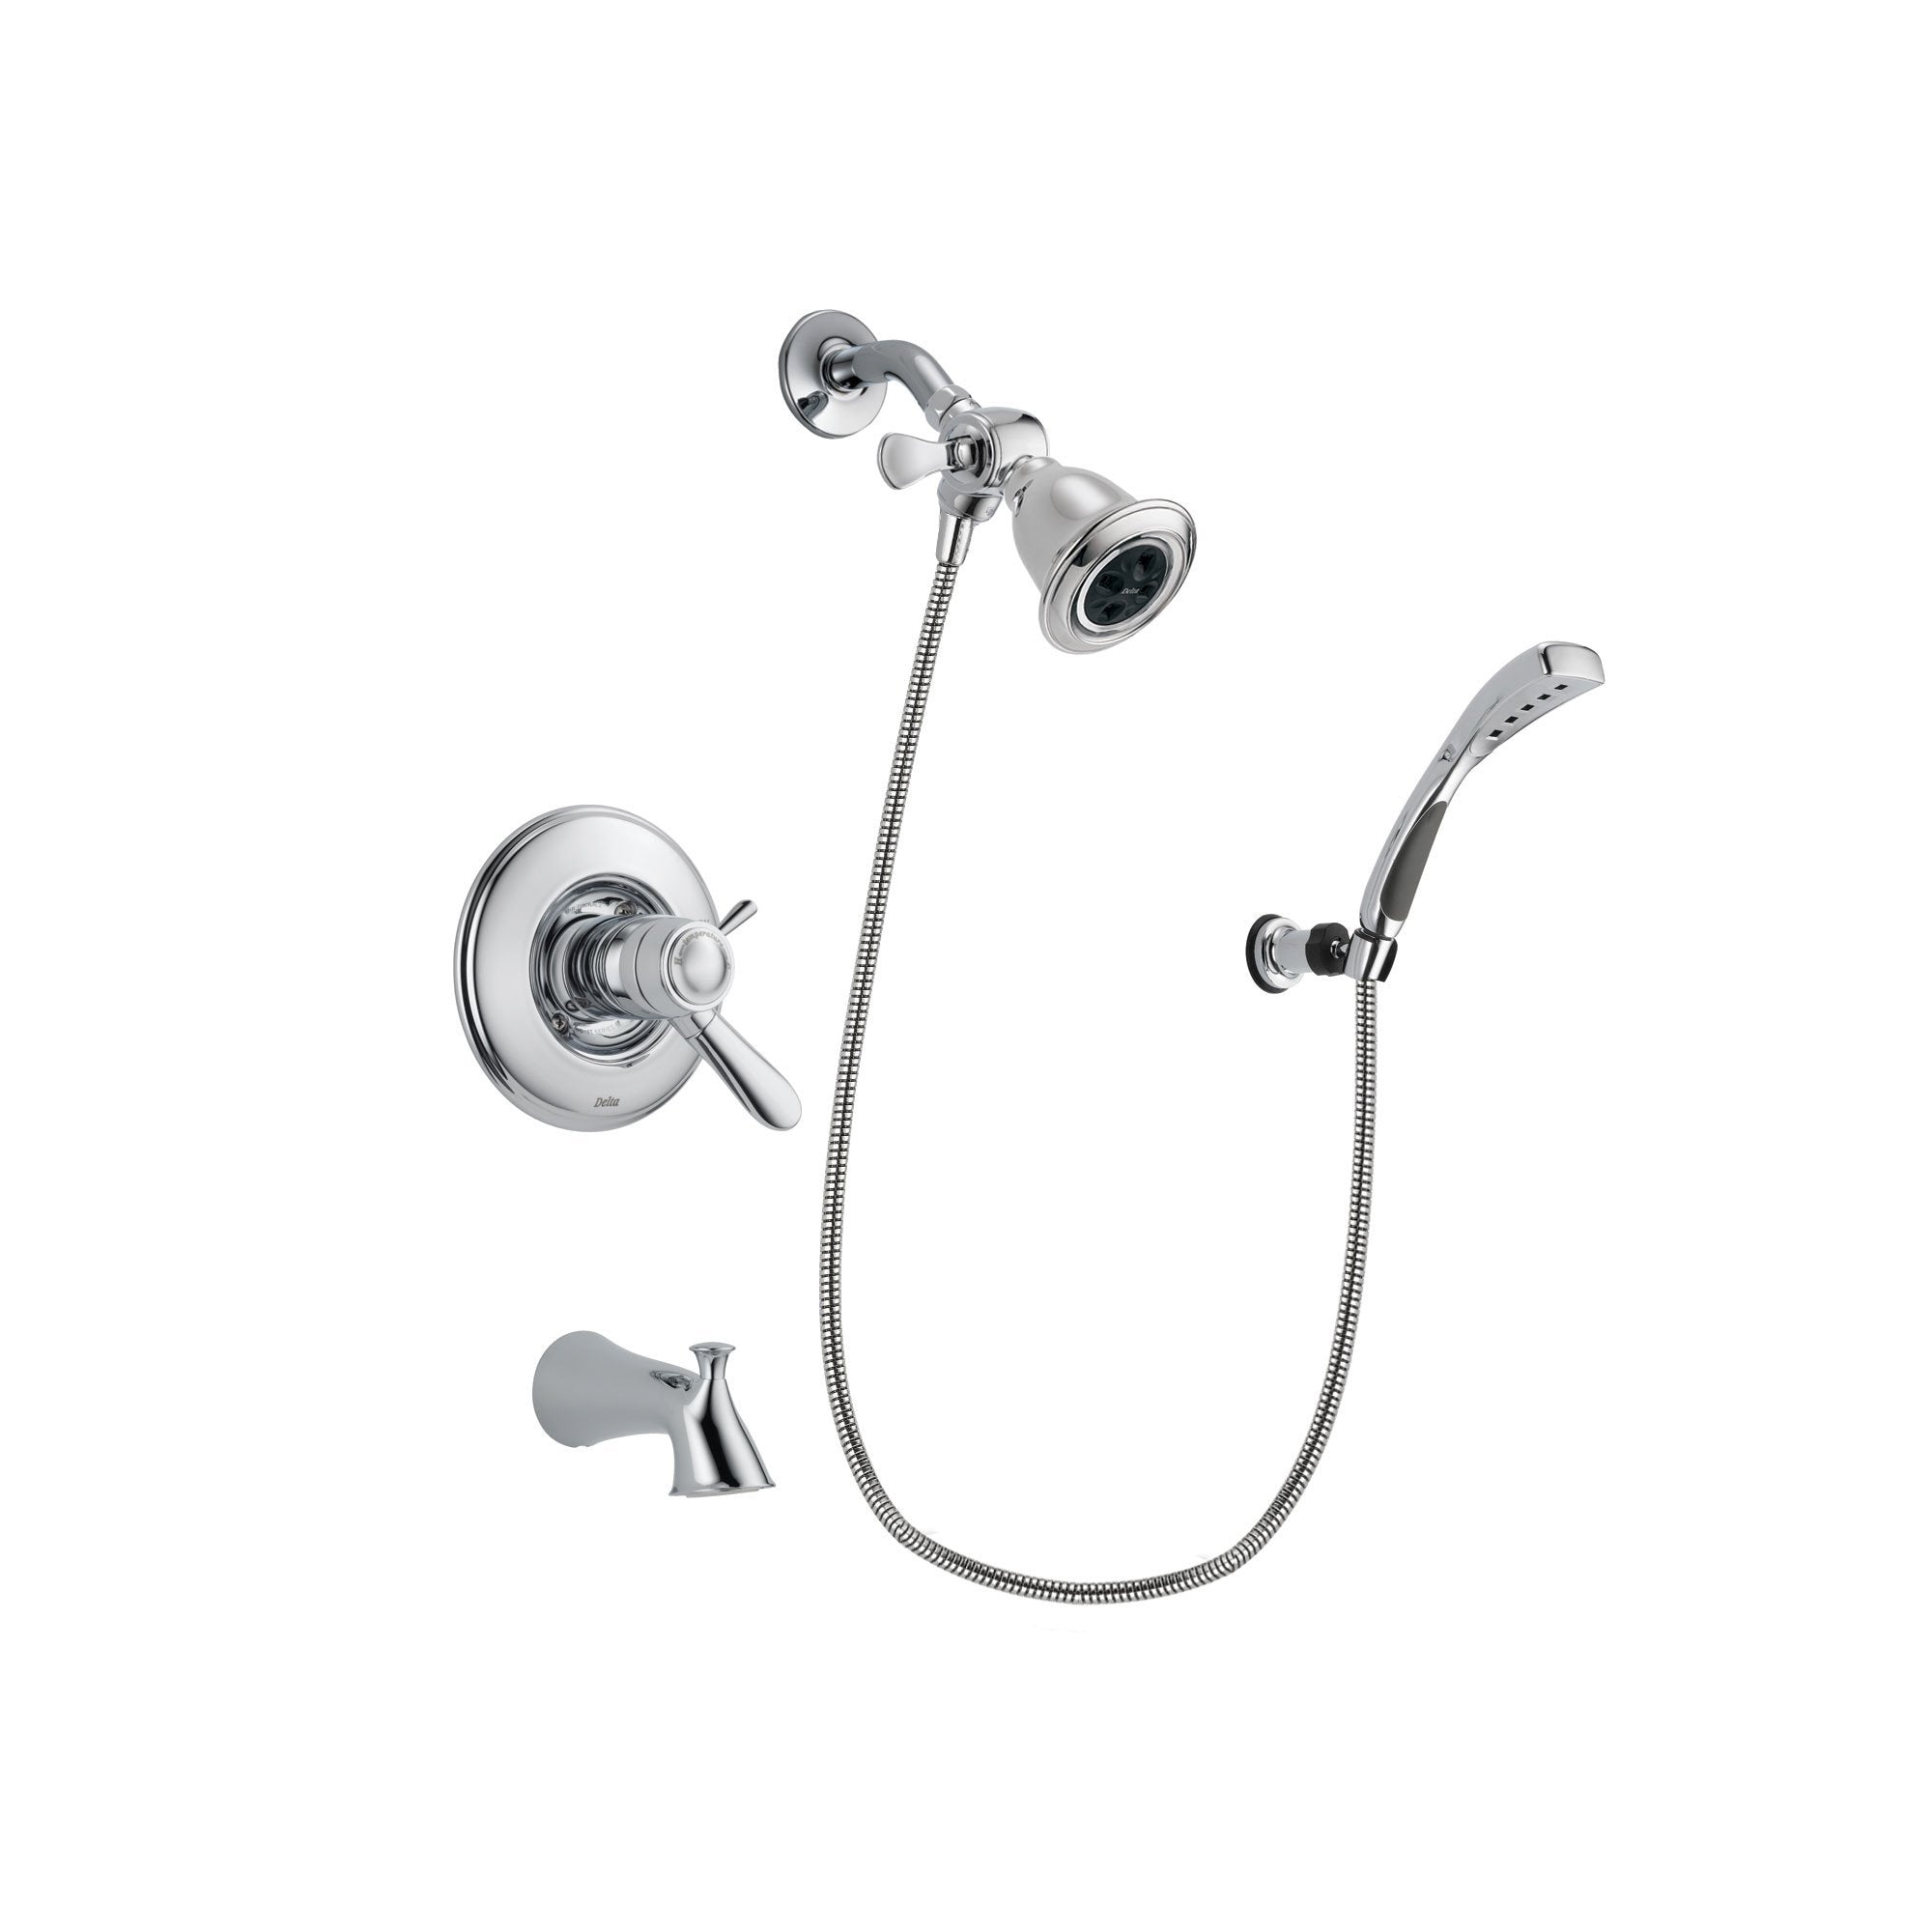 Delta Lahara Chrome Finish Thermostatic Tub and Shower Faucet System Package with Water Efficient Showerhead and Wall-Mount Bracket with Handheld Shower Spray Includes Rough-in Valve and Tub Spout DSP1003V